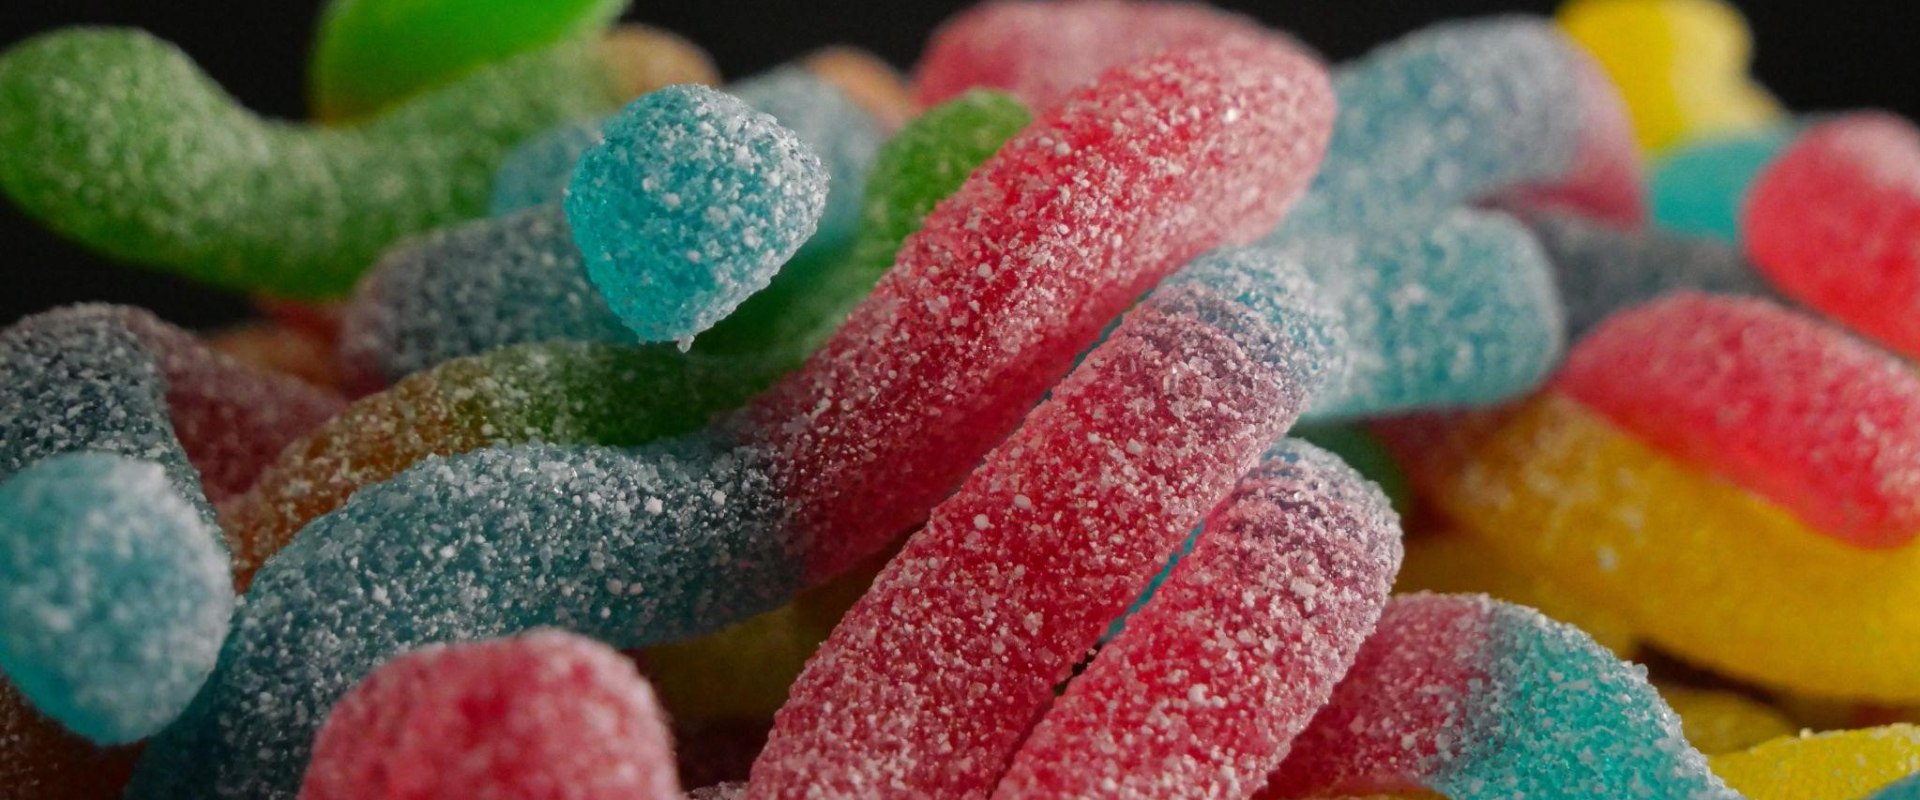 How long does it take to feel the effects of delta 9 gummies?